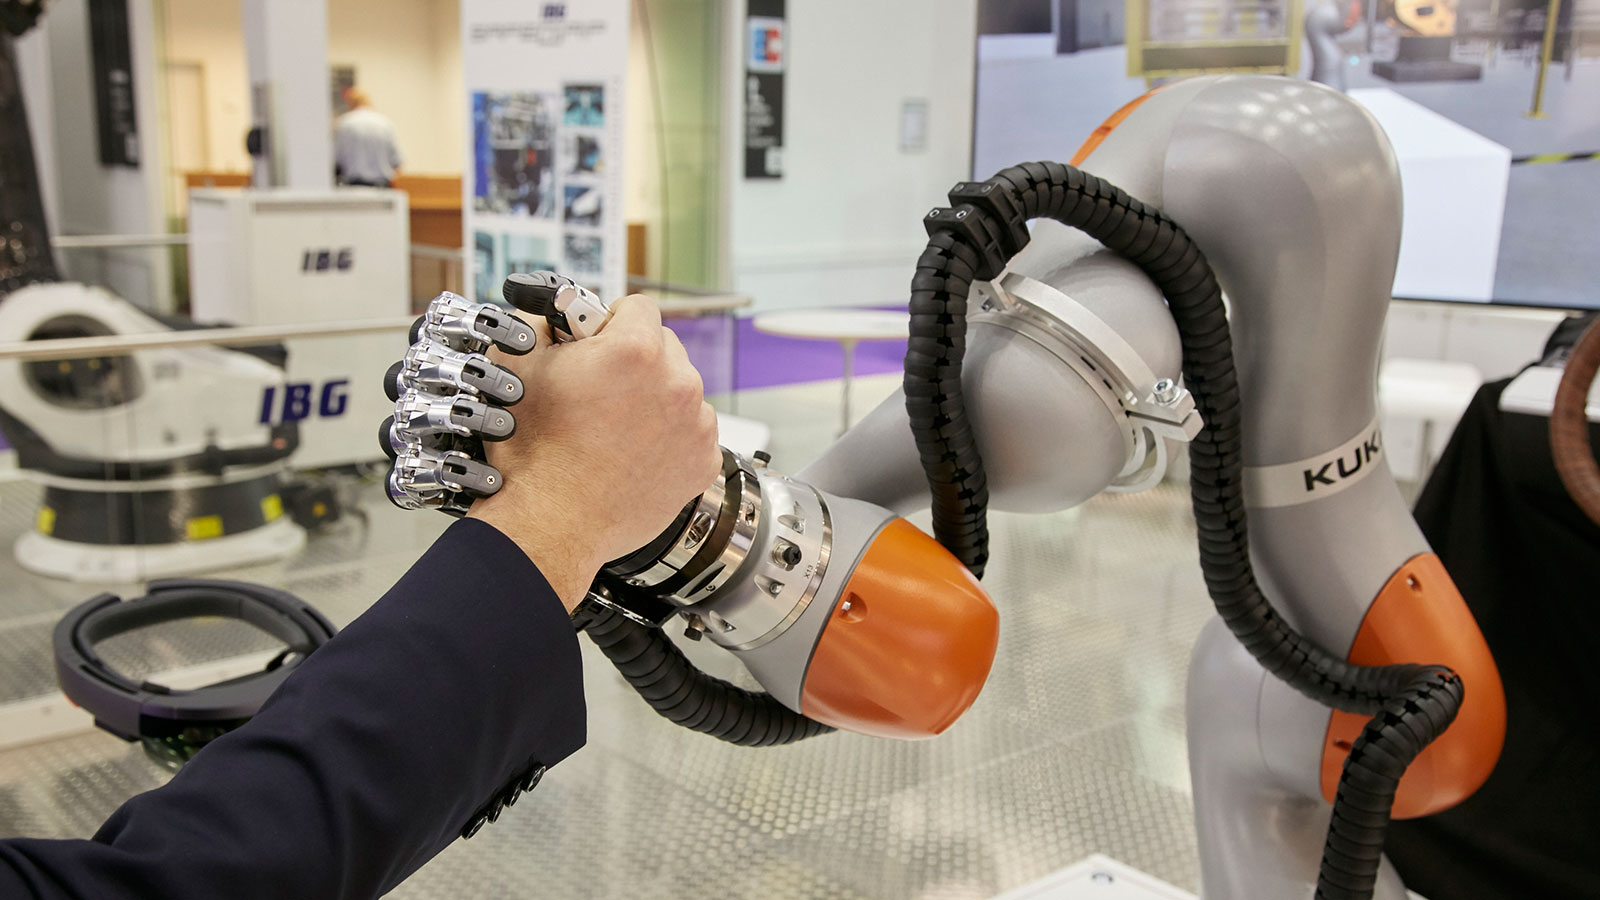 Arm wrestling: A robot arm and a human at NORTEC